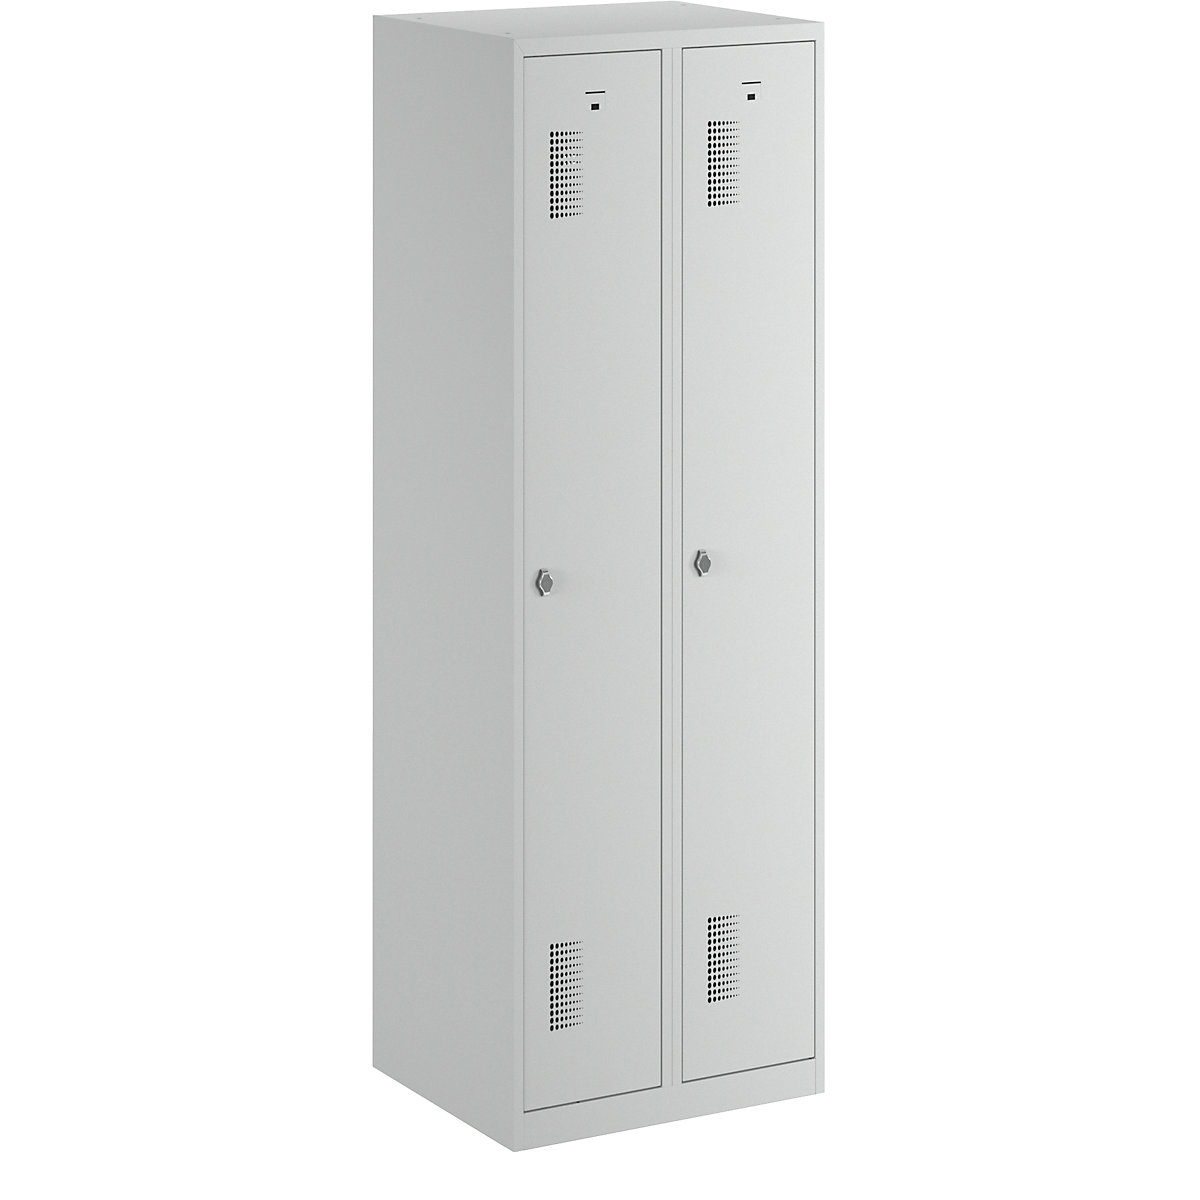 AMSTERDAM cloakroom locker – eurokraft basic, height 1800 mm, width 600 mm, 2 x 298 mm wide compartments, with fittings for padlock, completely light grey-12